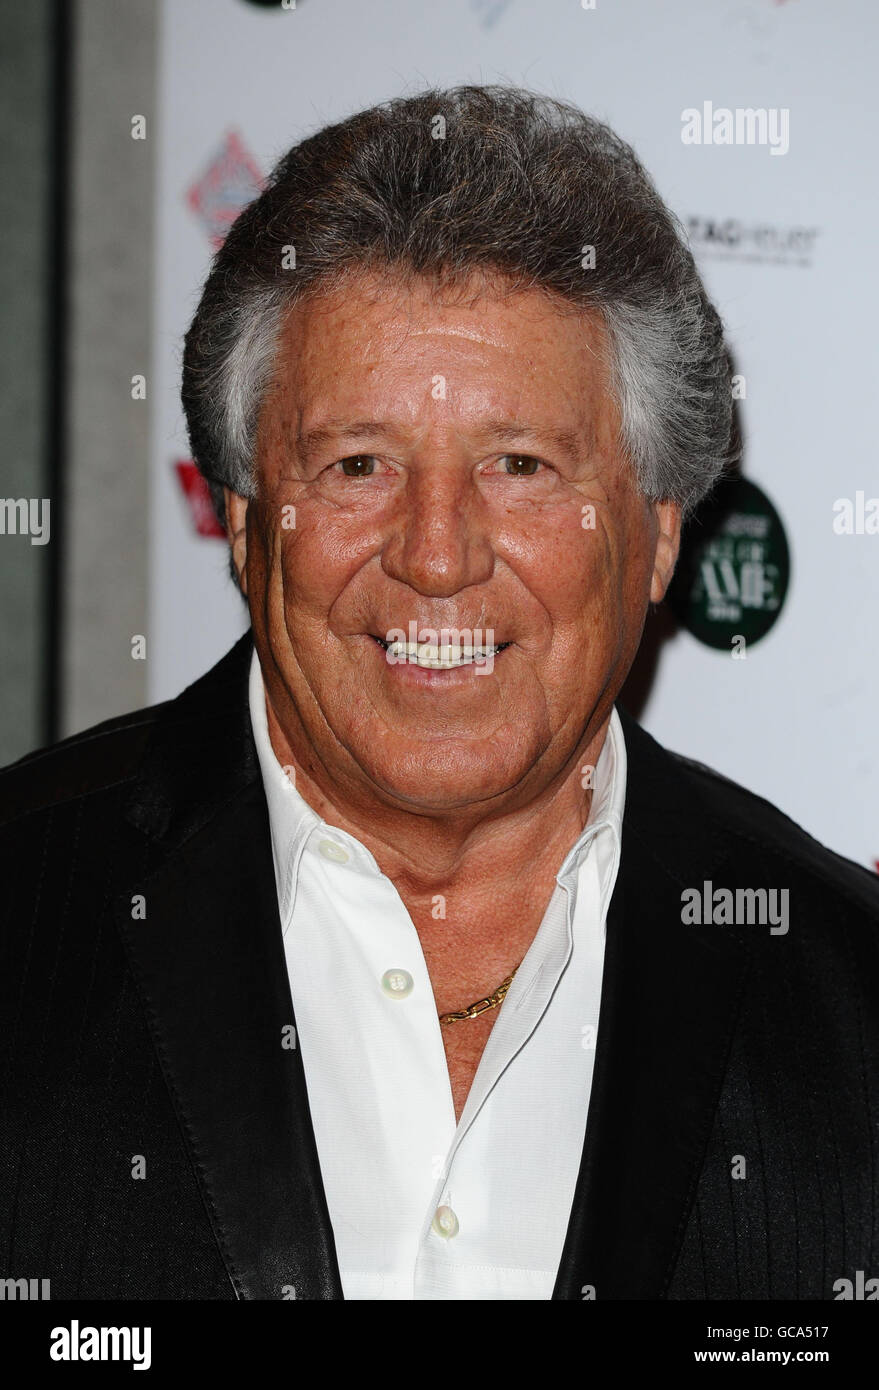 Motorsport Hall Of Fame. Mario Andretti arrives at the inaugural Motorsport Hall Of Fame held at the Roundhouse in Camden, London. Stock Photo